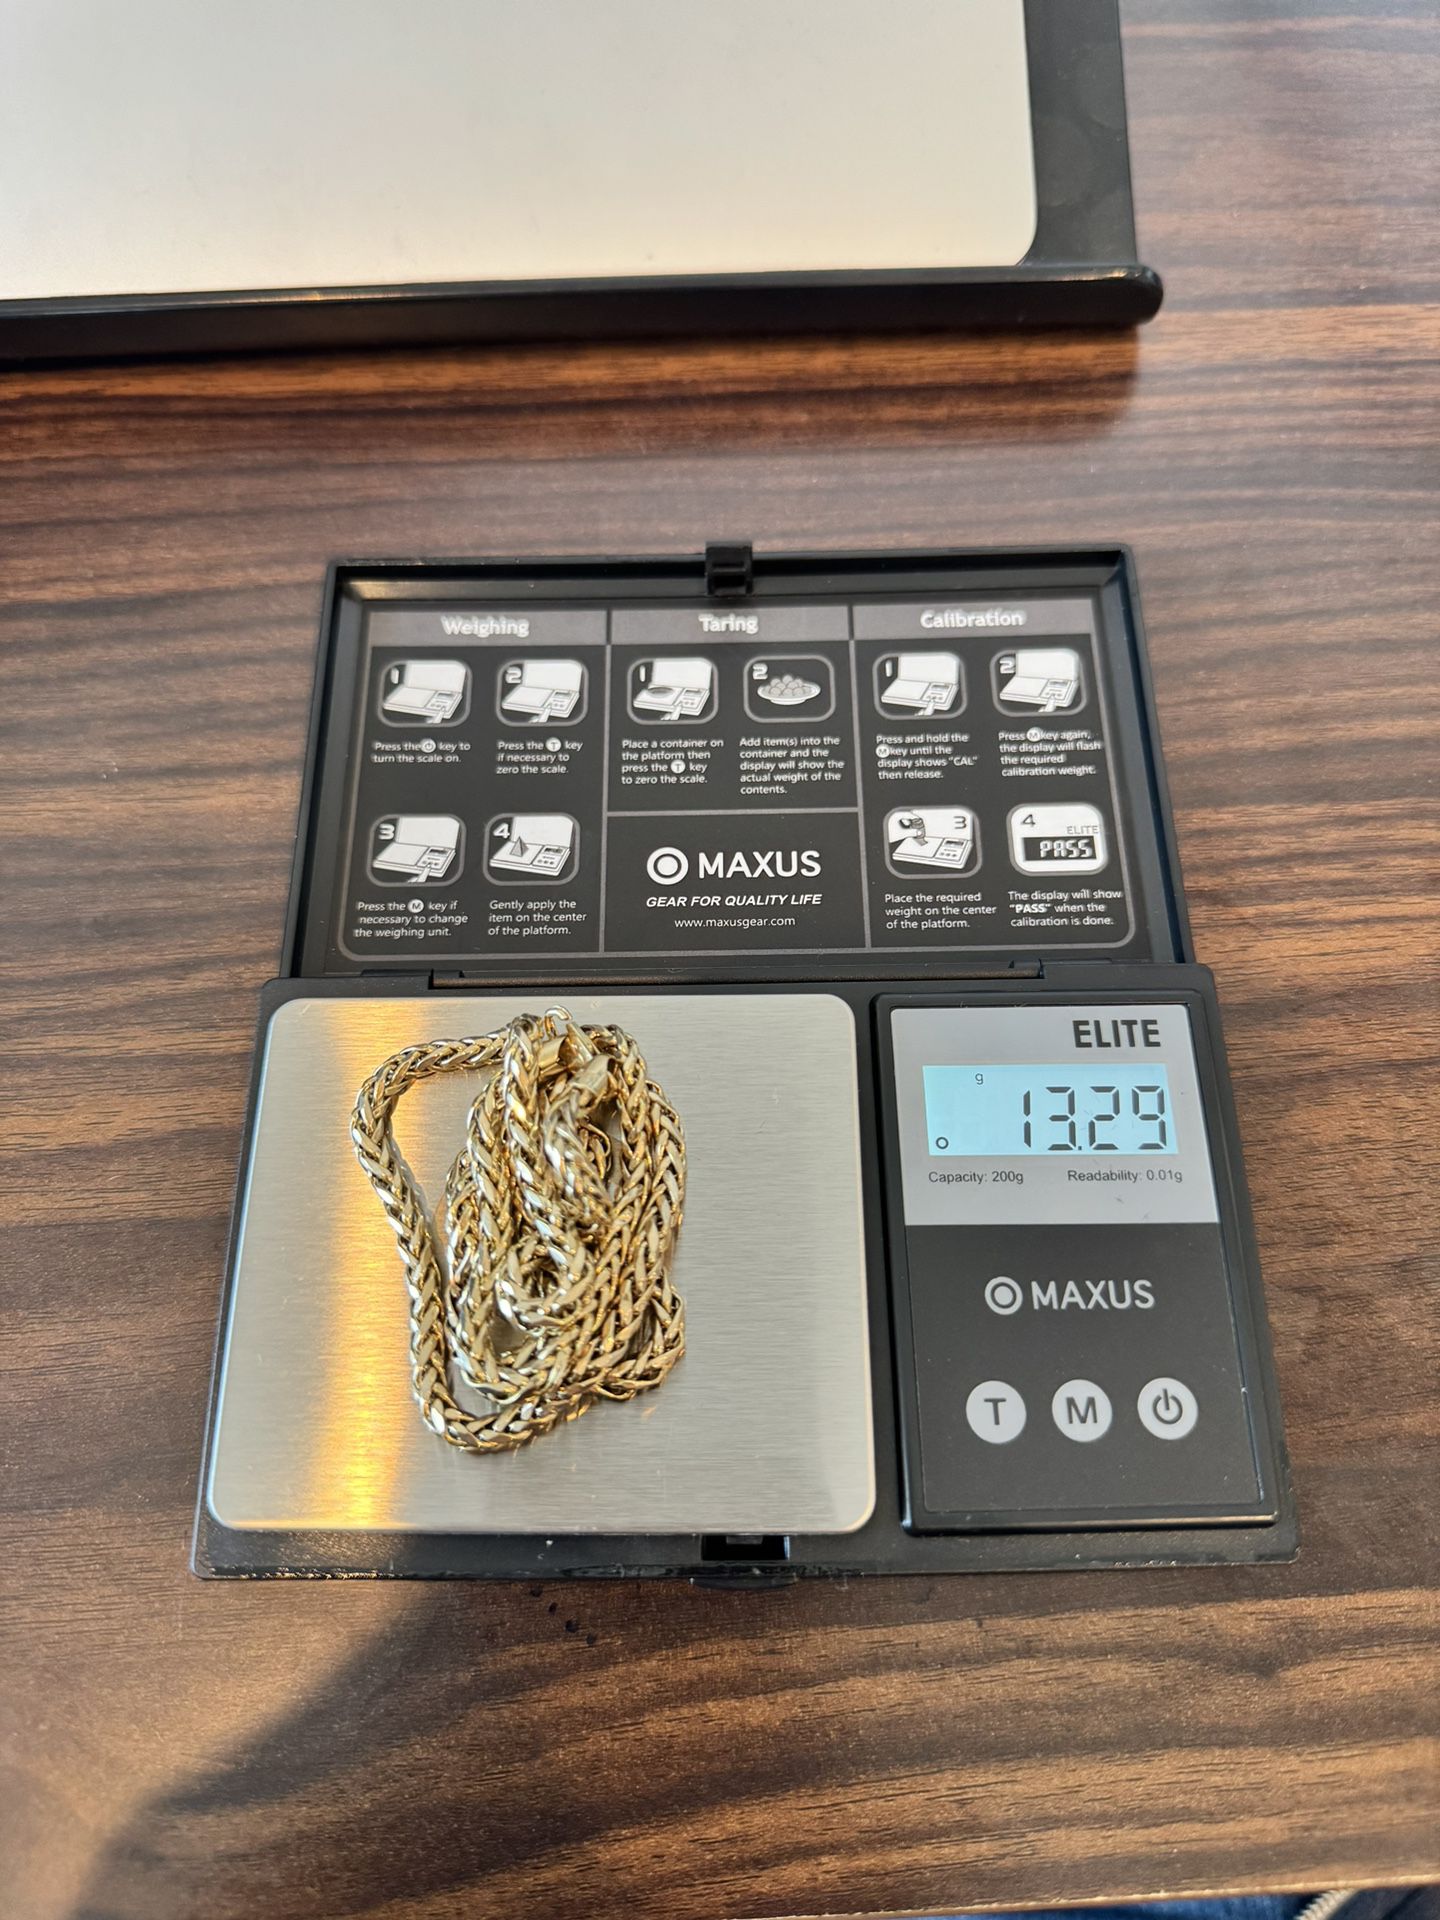 Franco Gold Chain Necklace 13.29 Grams